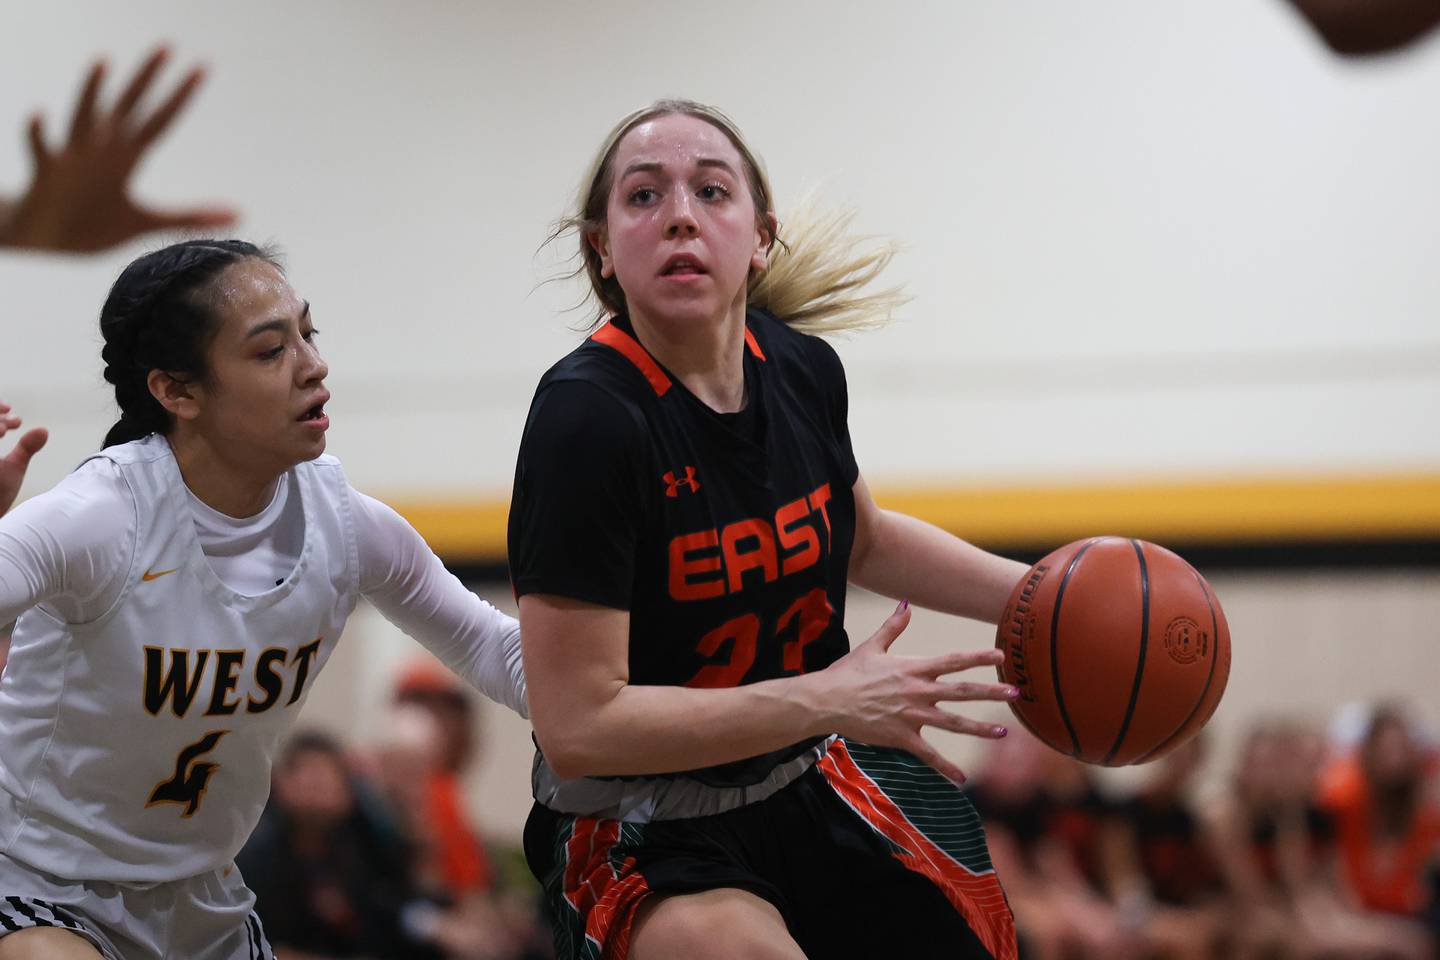 Plainfield East’s Lexi Sepulveda works the ball against Joliet West on Thursday, February 2nd.